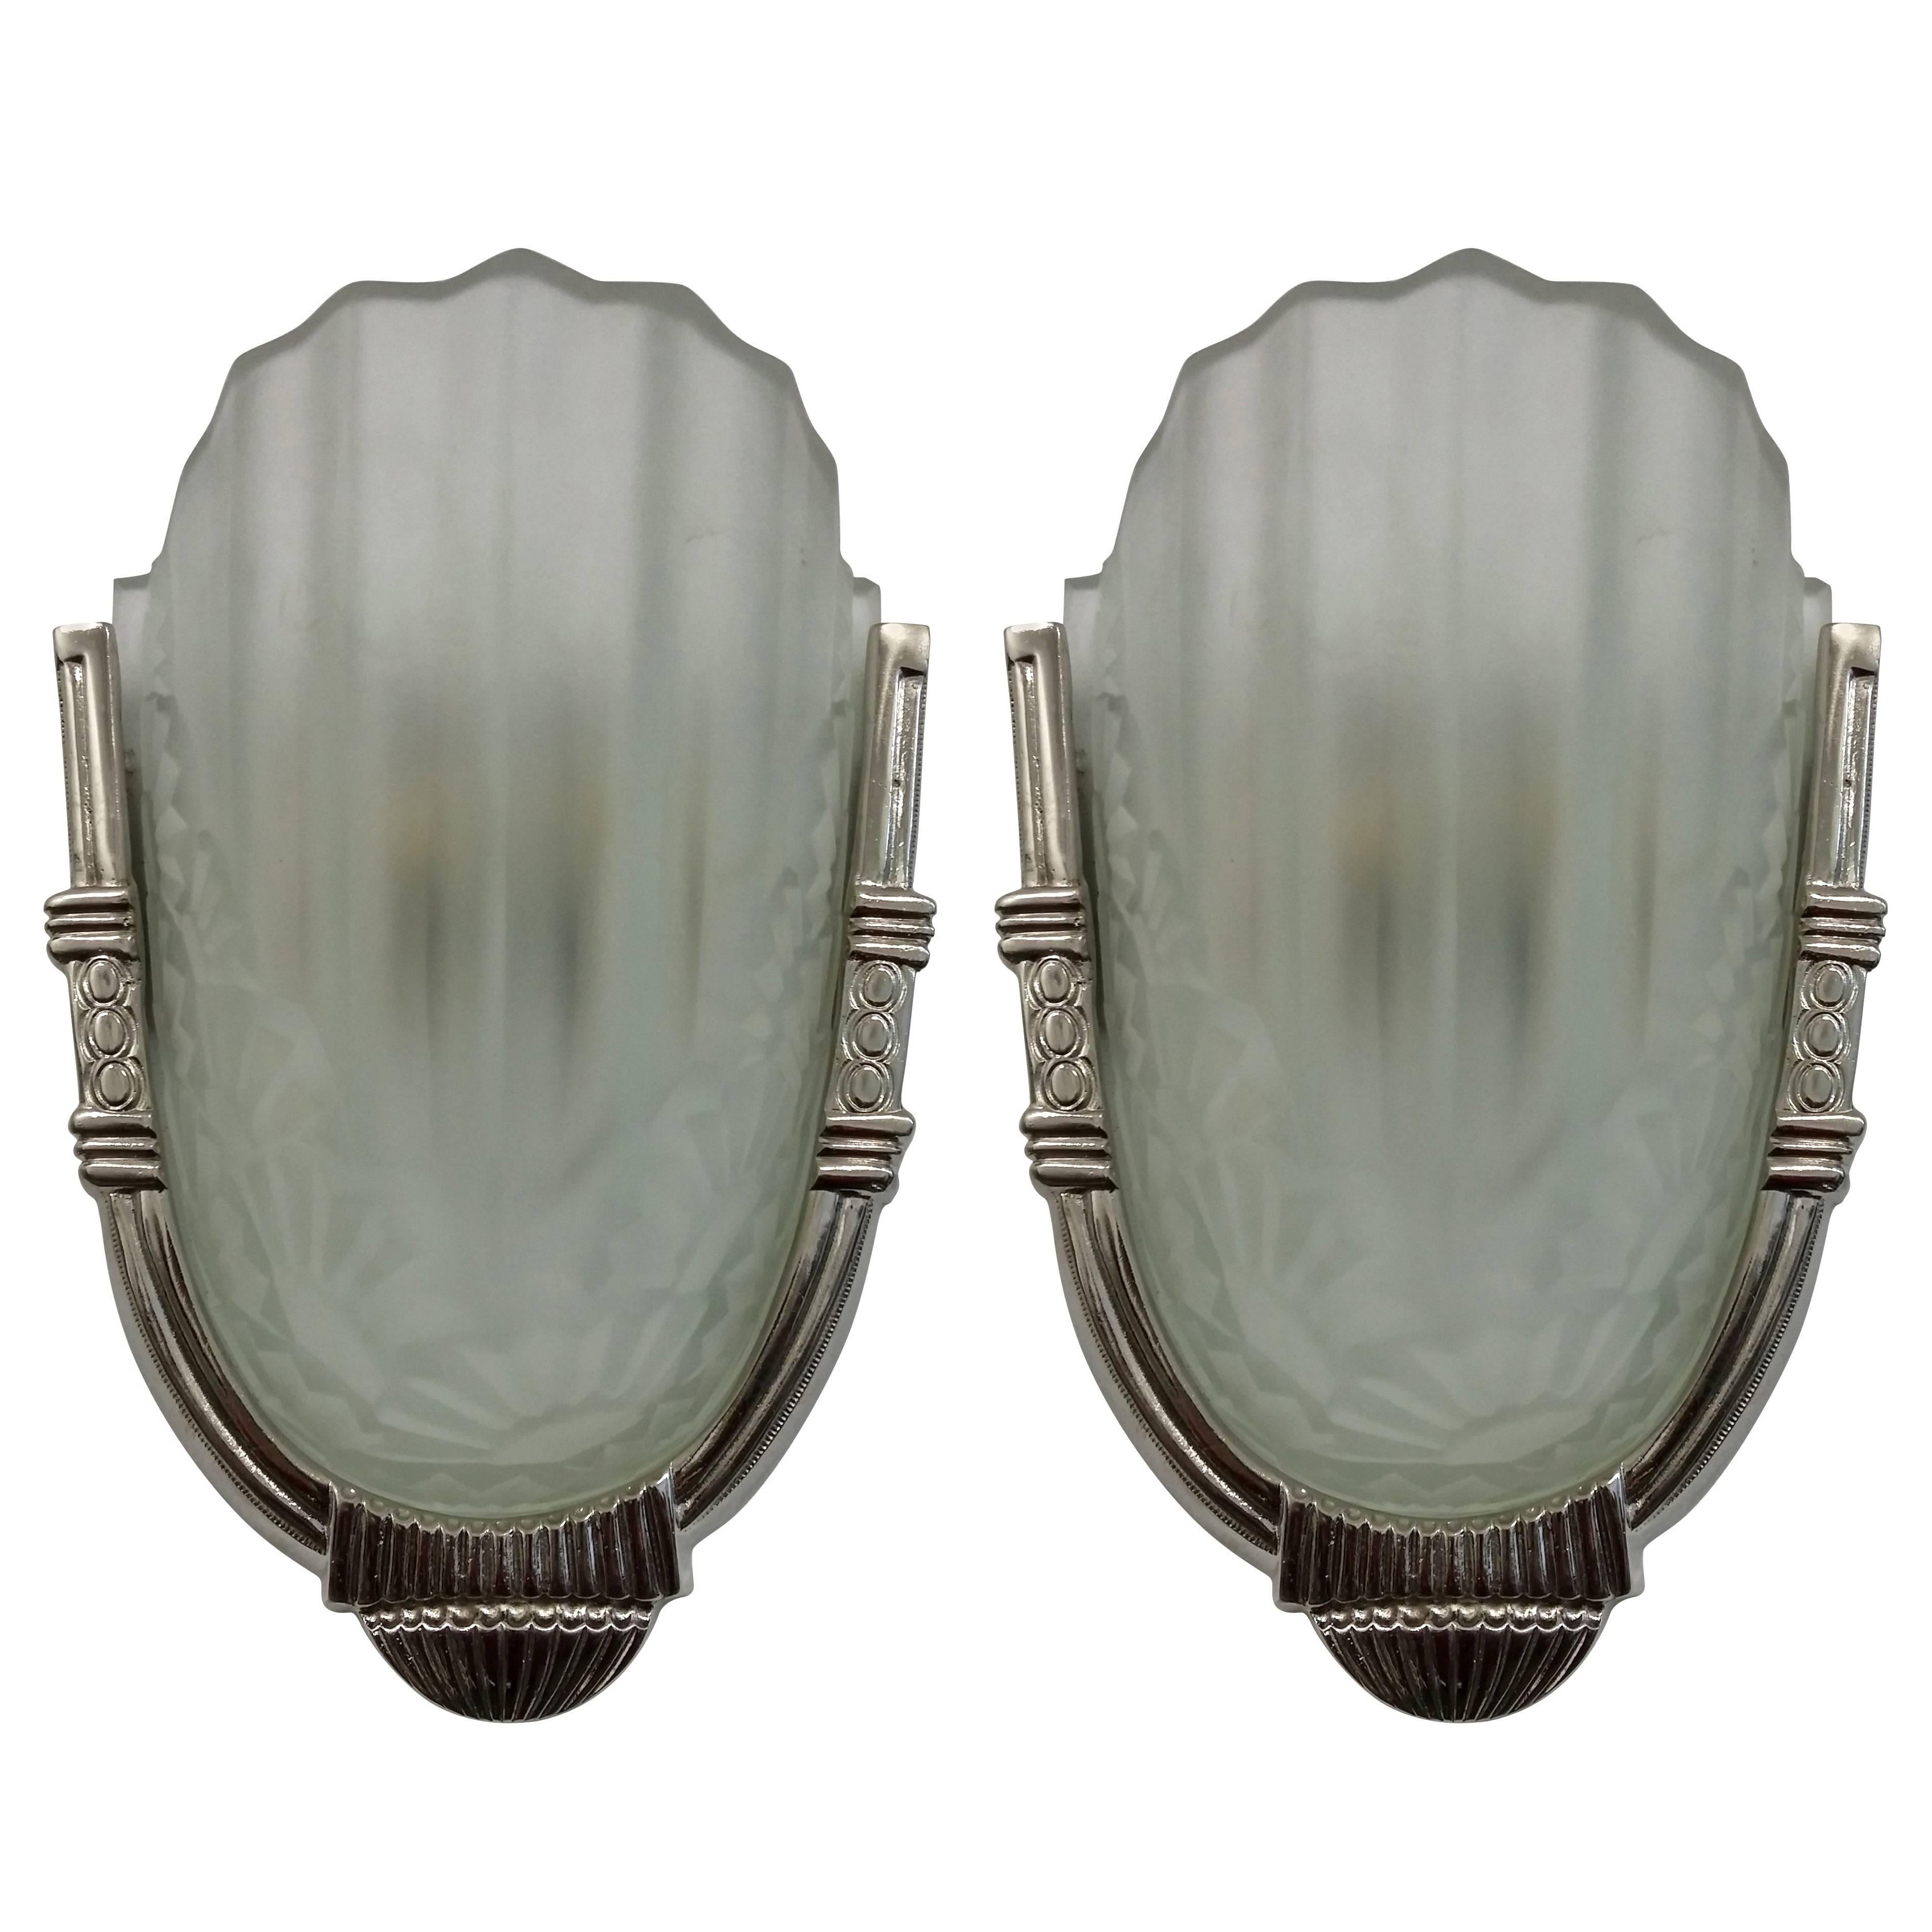 Pair of French Art Deco Wall Sconces by Degue